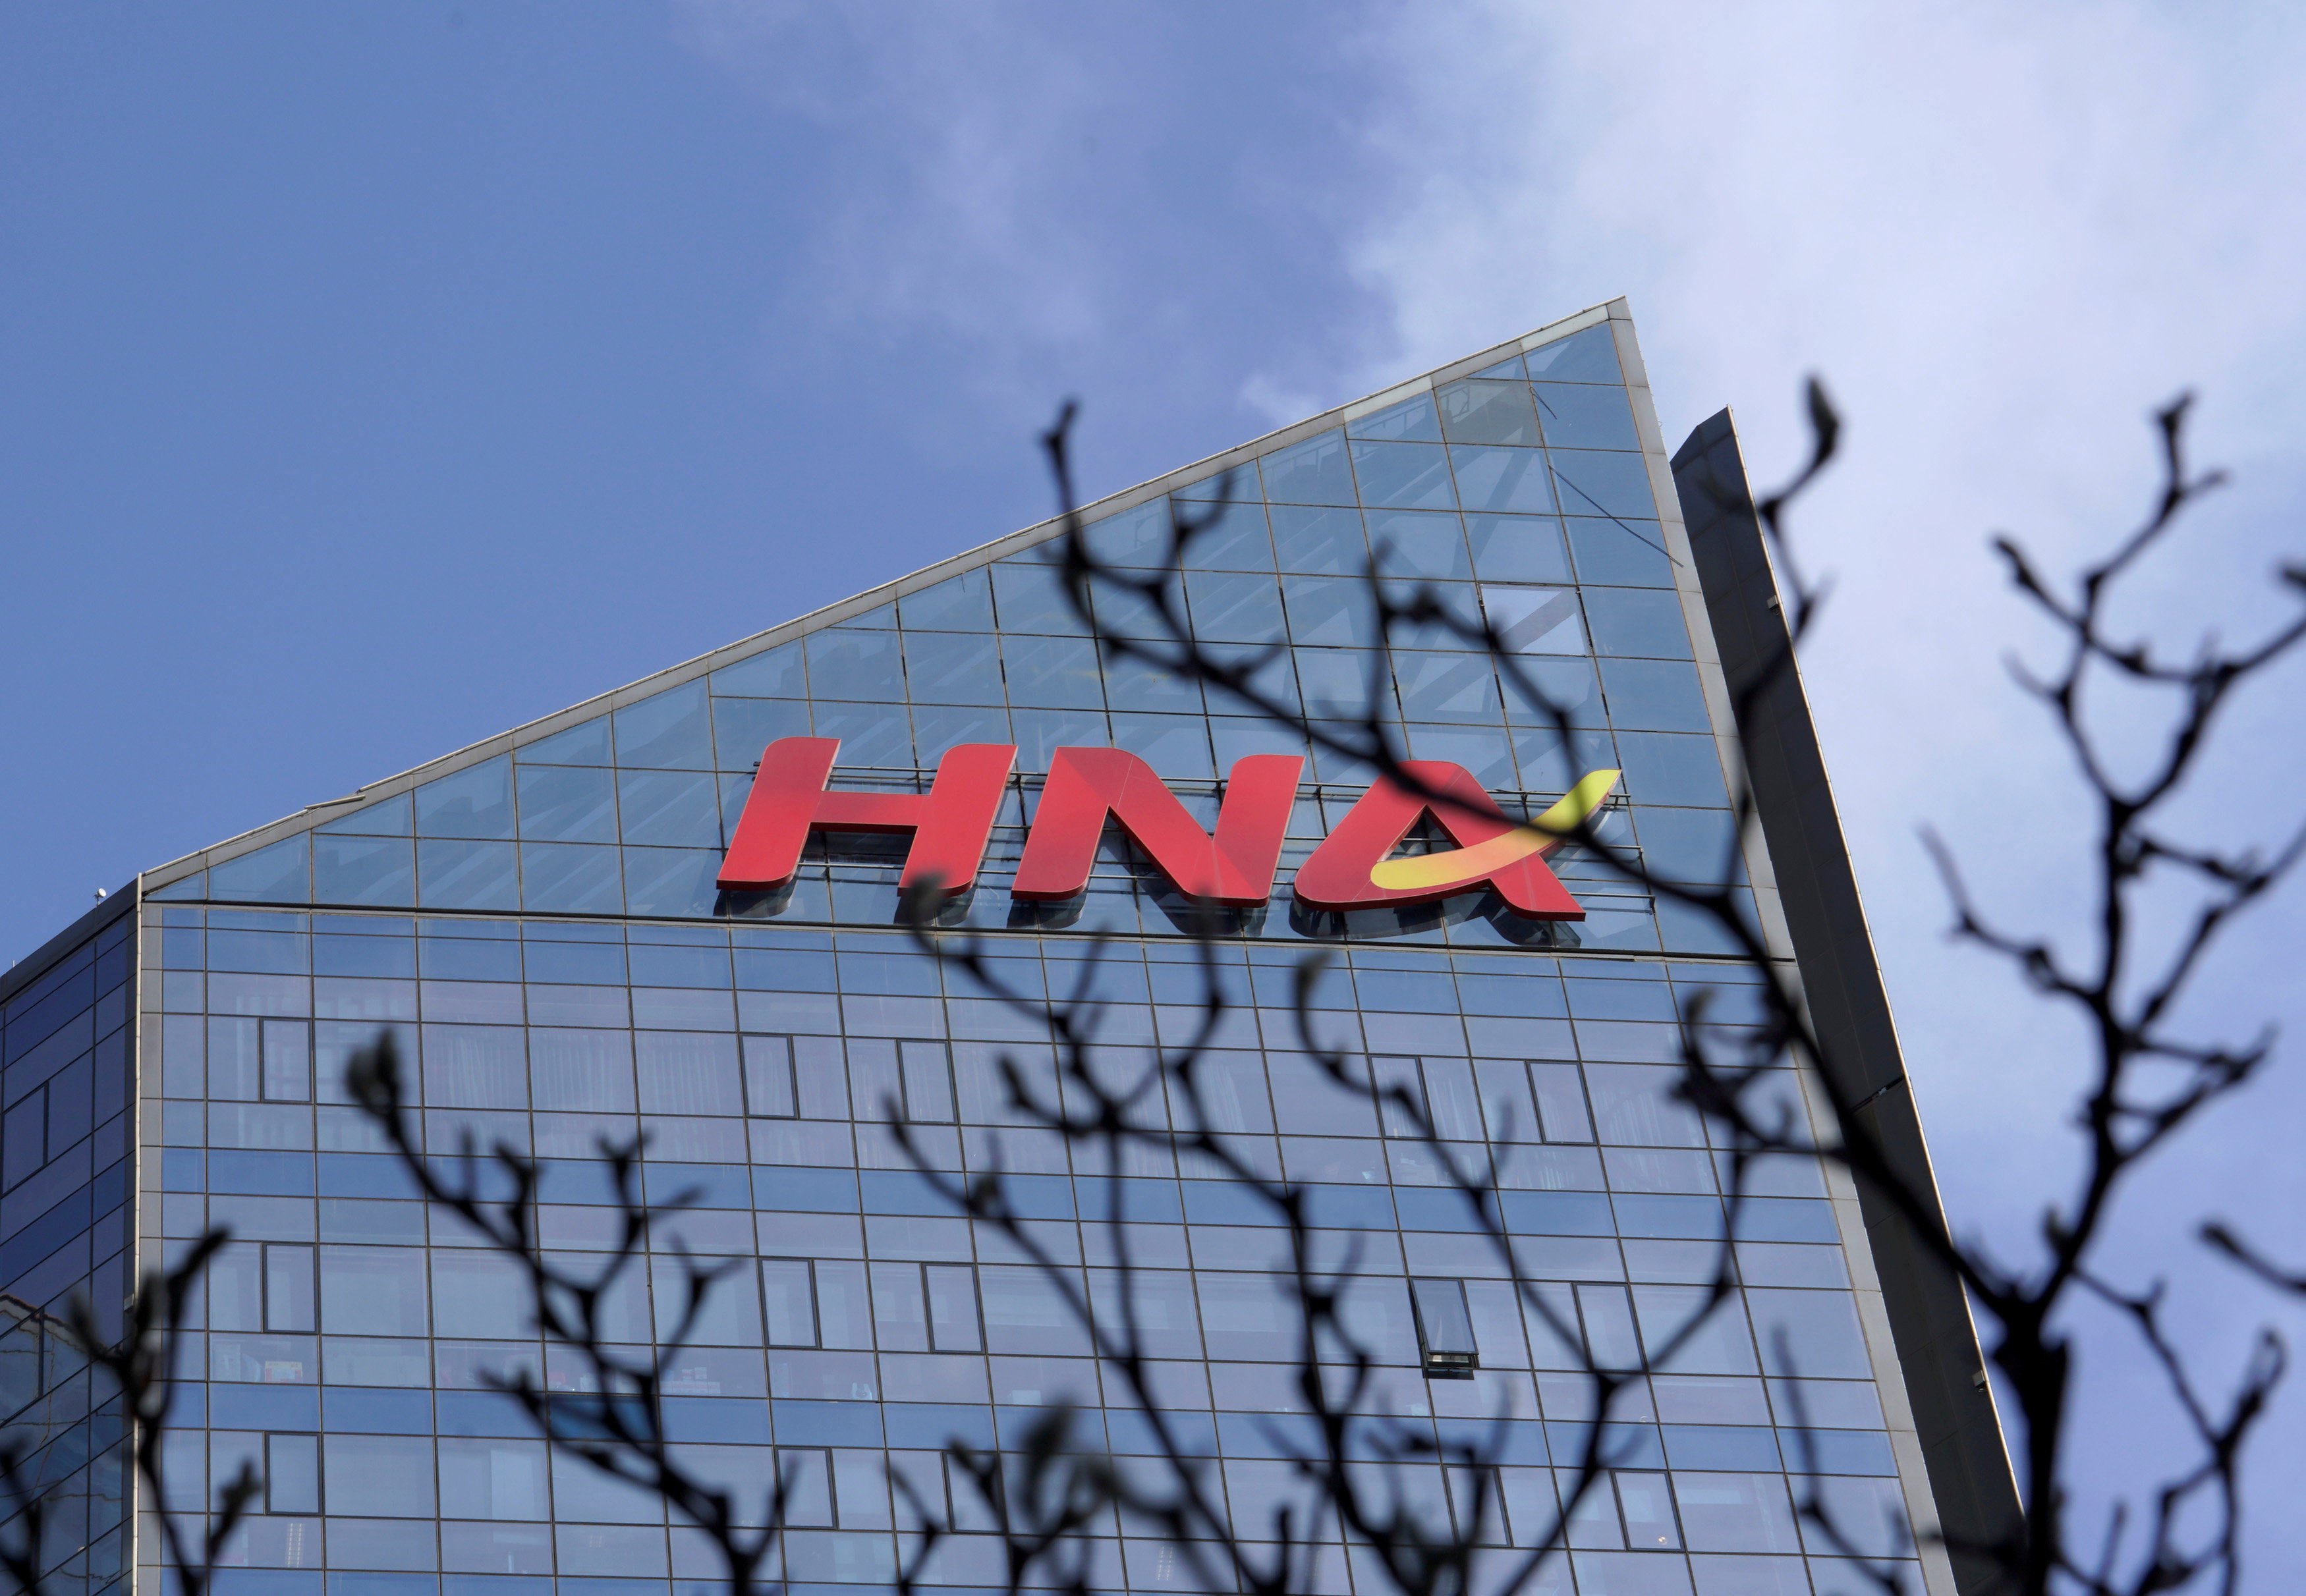 HNA Group was one of China’s largest privately owned conglomerates before its collapsed in 2020. Photo: Reuters